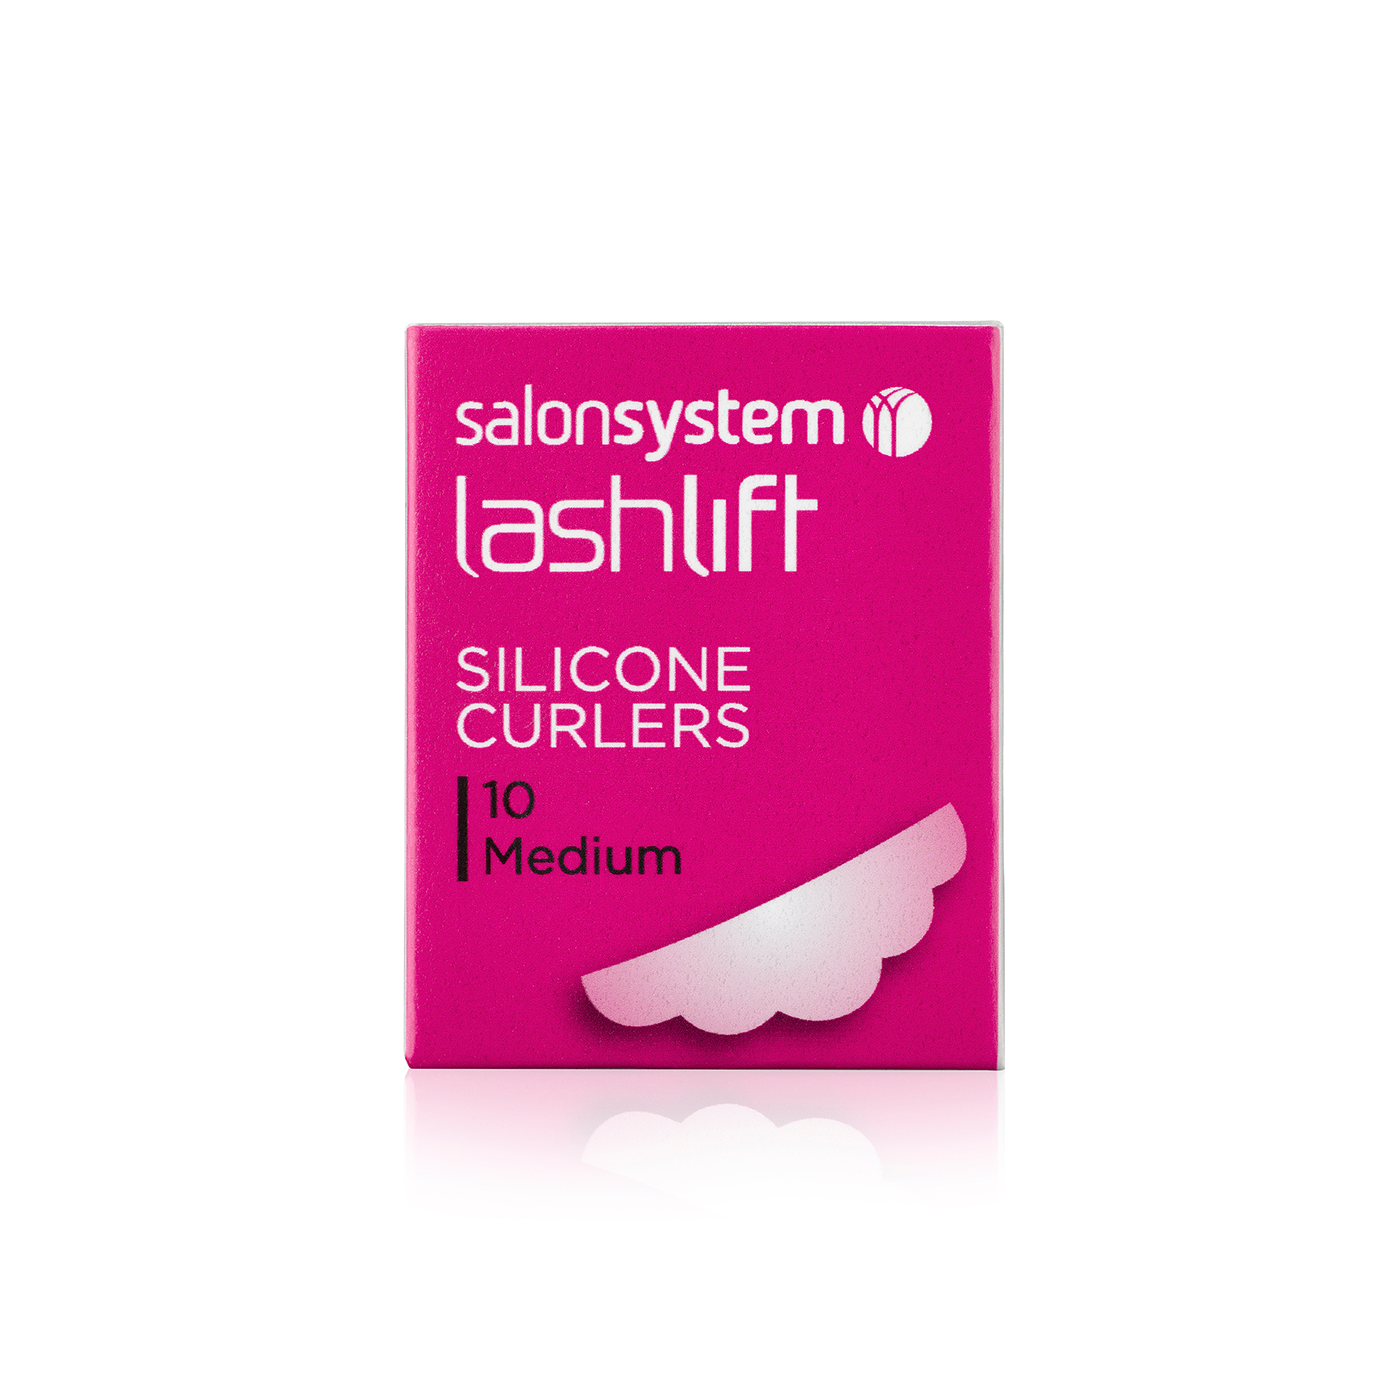 LashLift Silicone Curlers Medium (10) - Ultimate Hair and Beauty